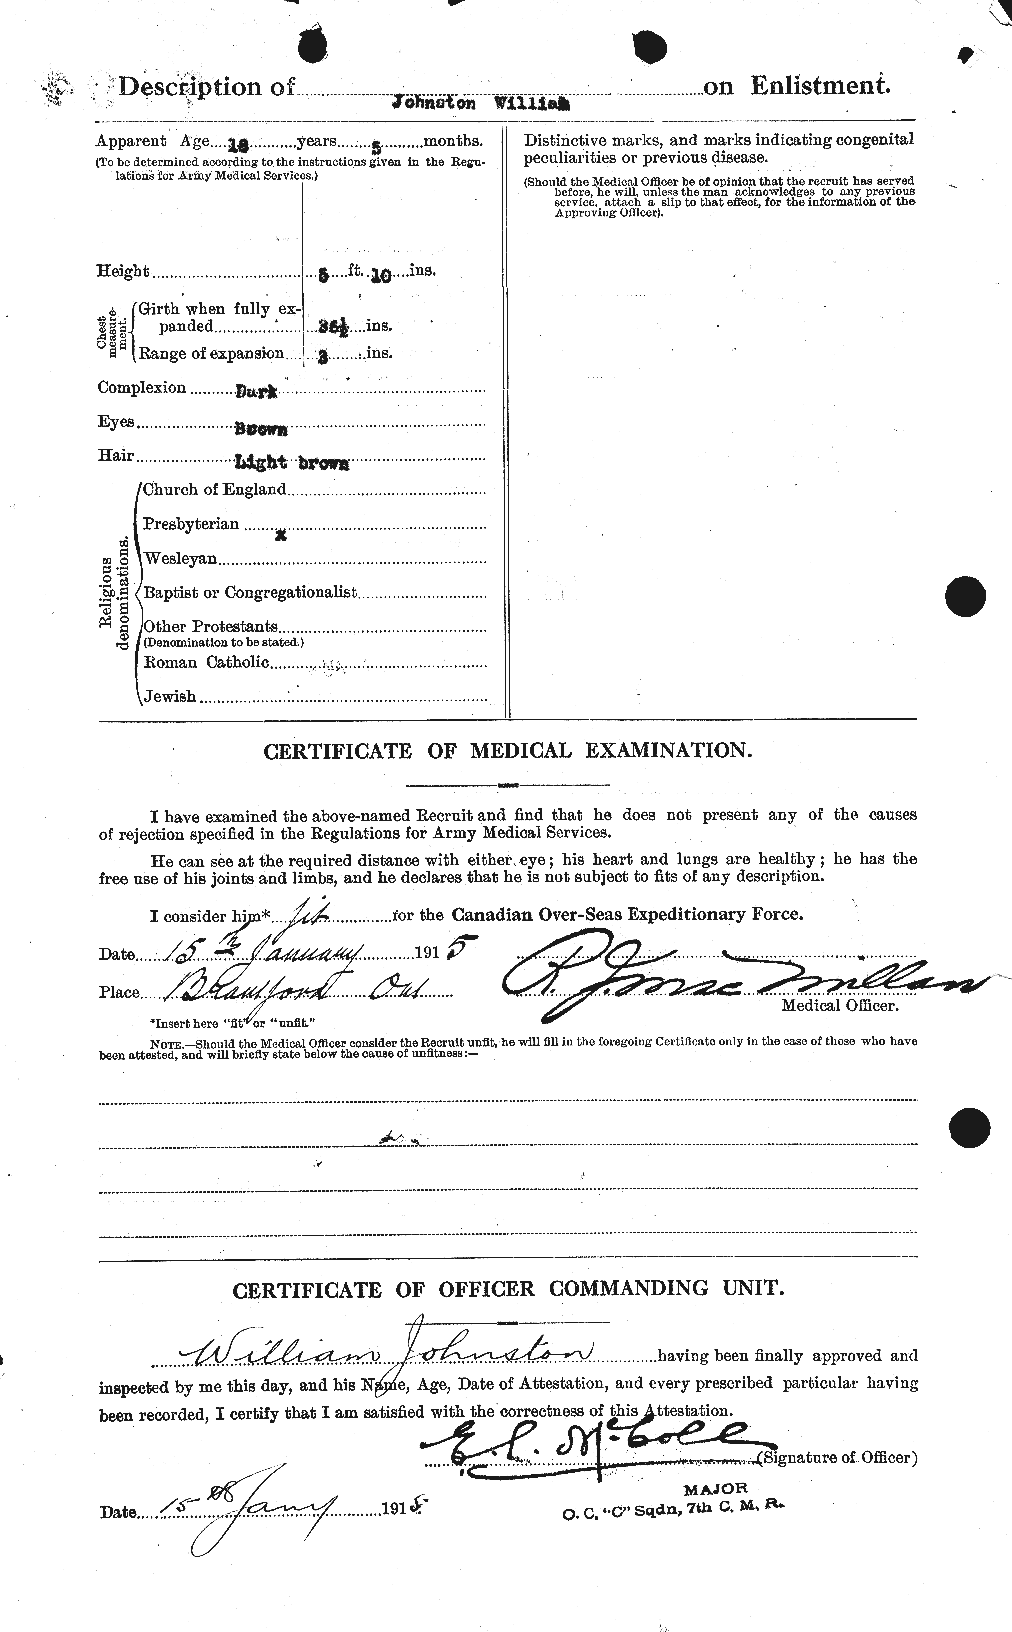 Personnel Records of the First World War - CEF 427251b